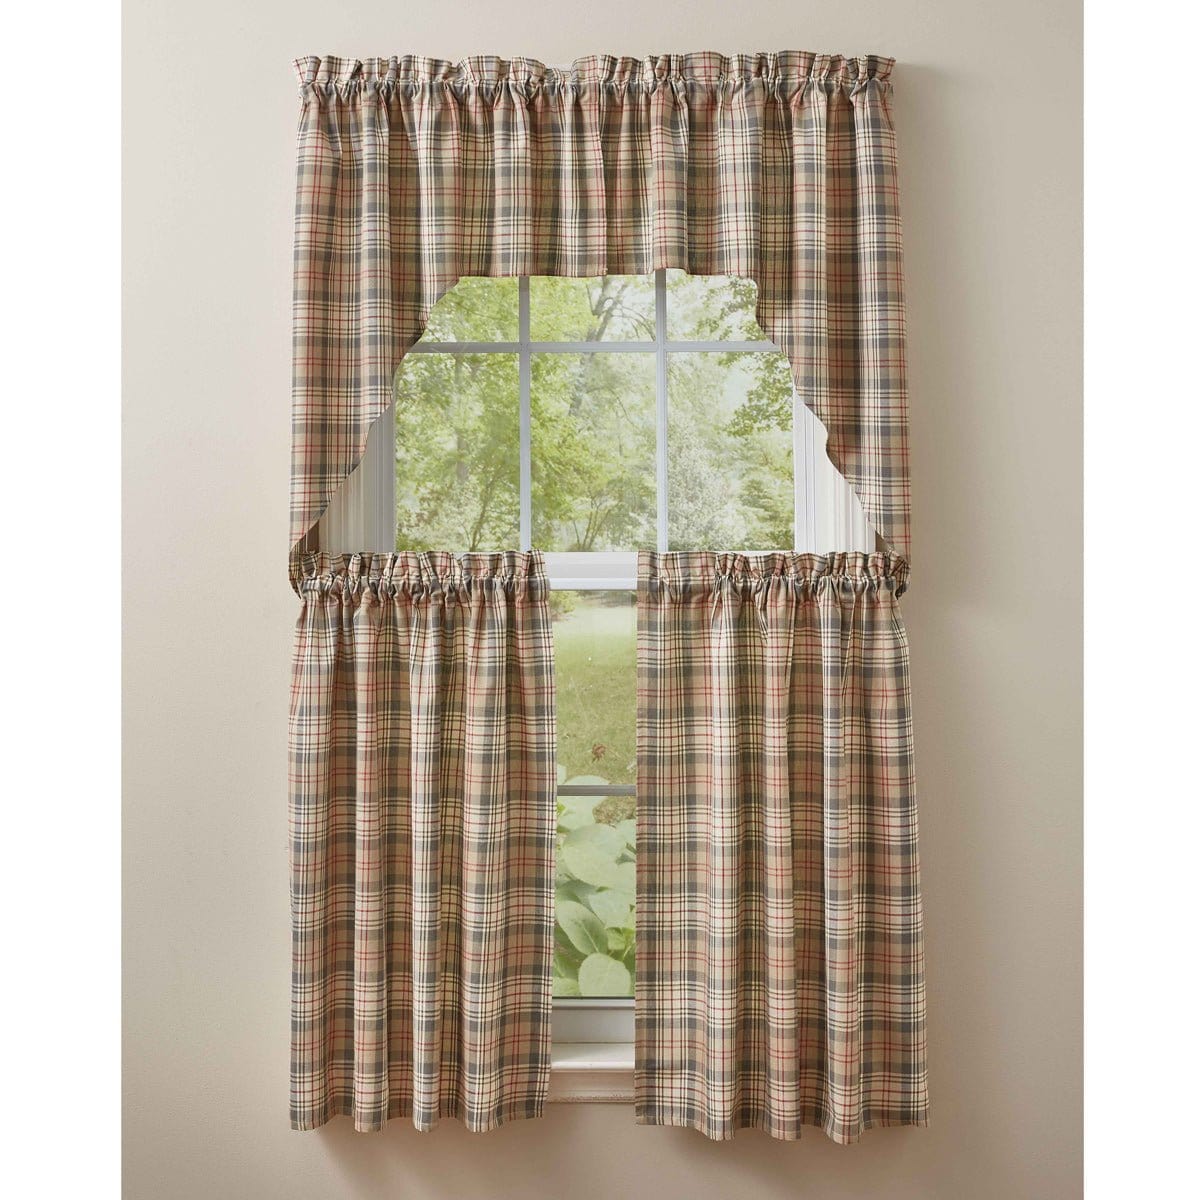 gentry Swag Pair 36' Long Unlined-Park Designs-The Village Merchant